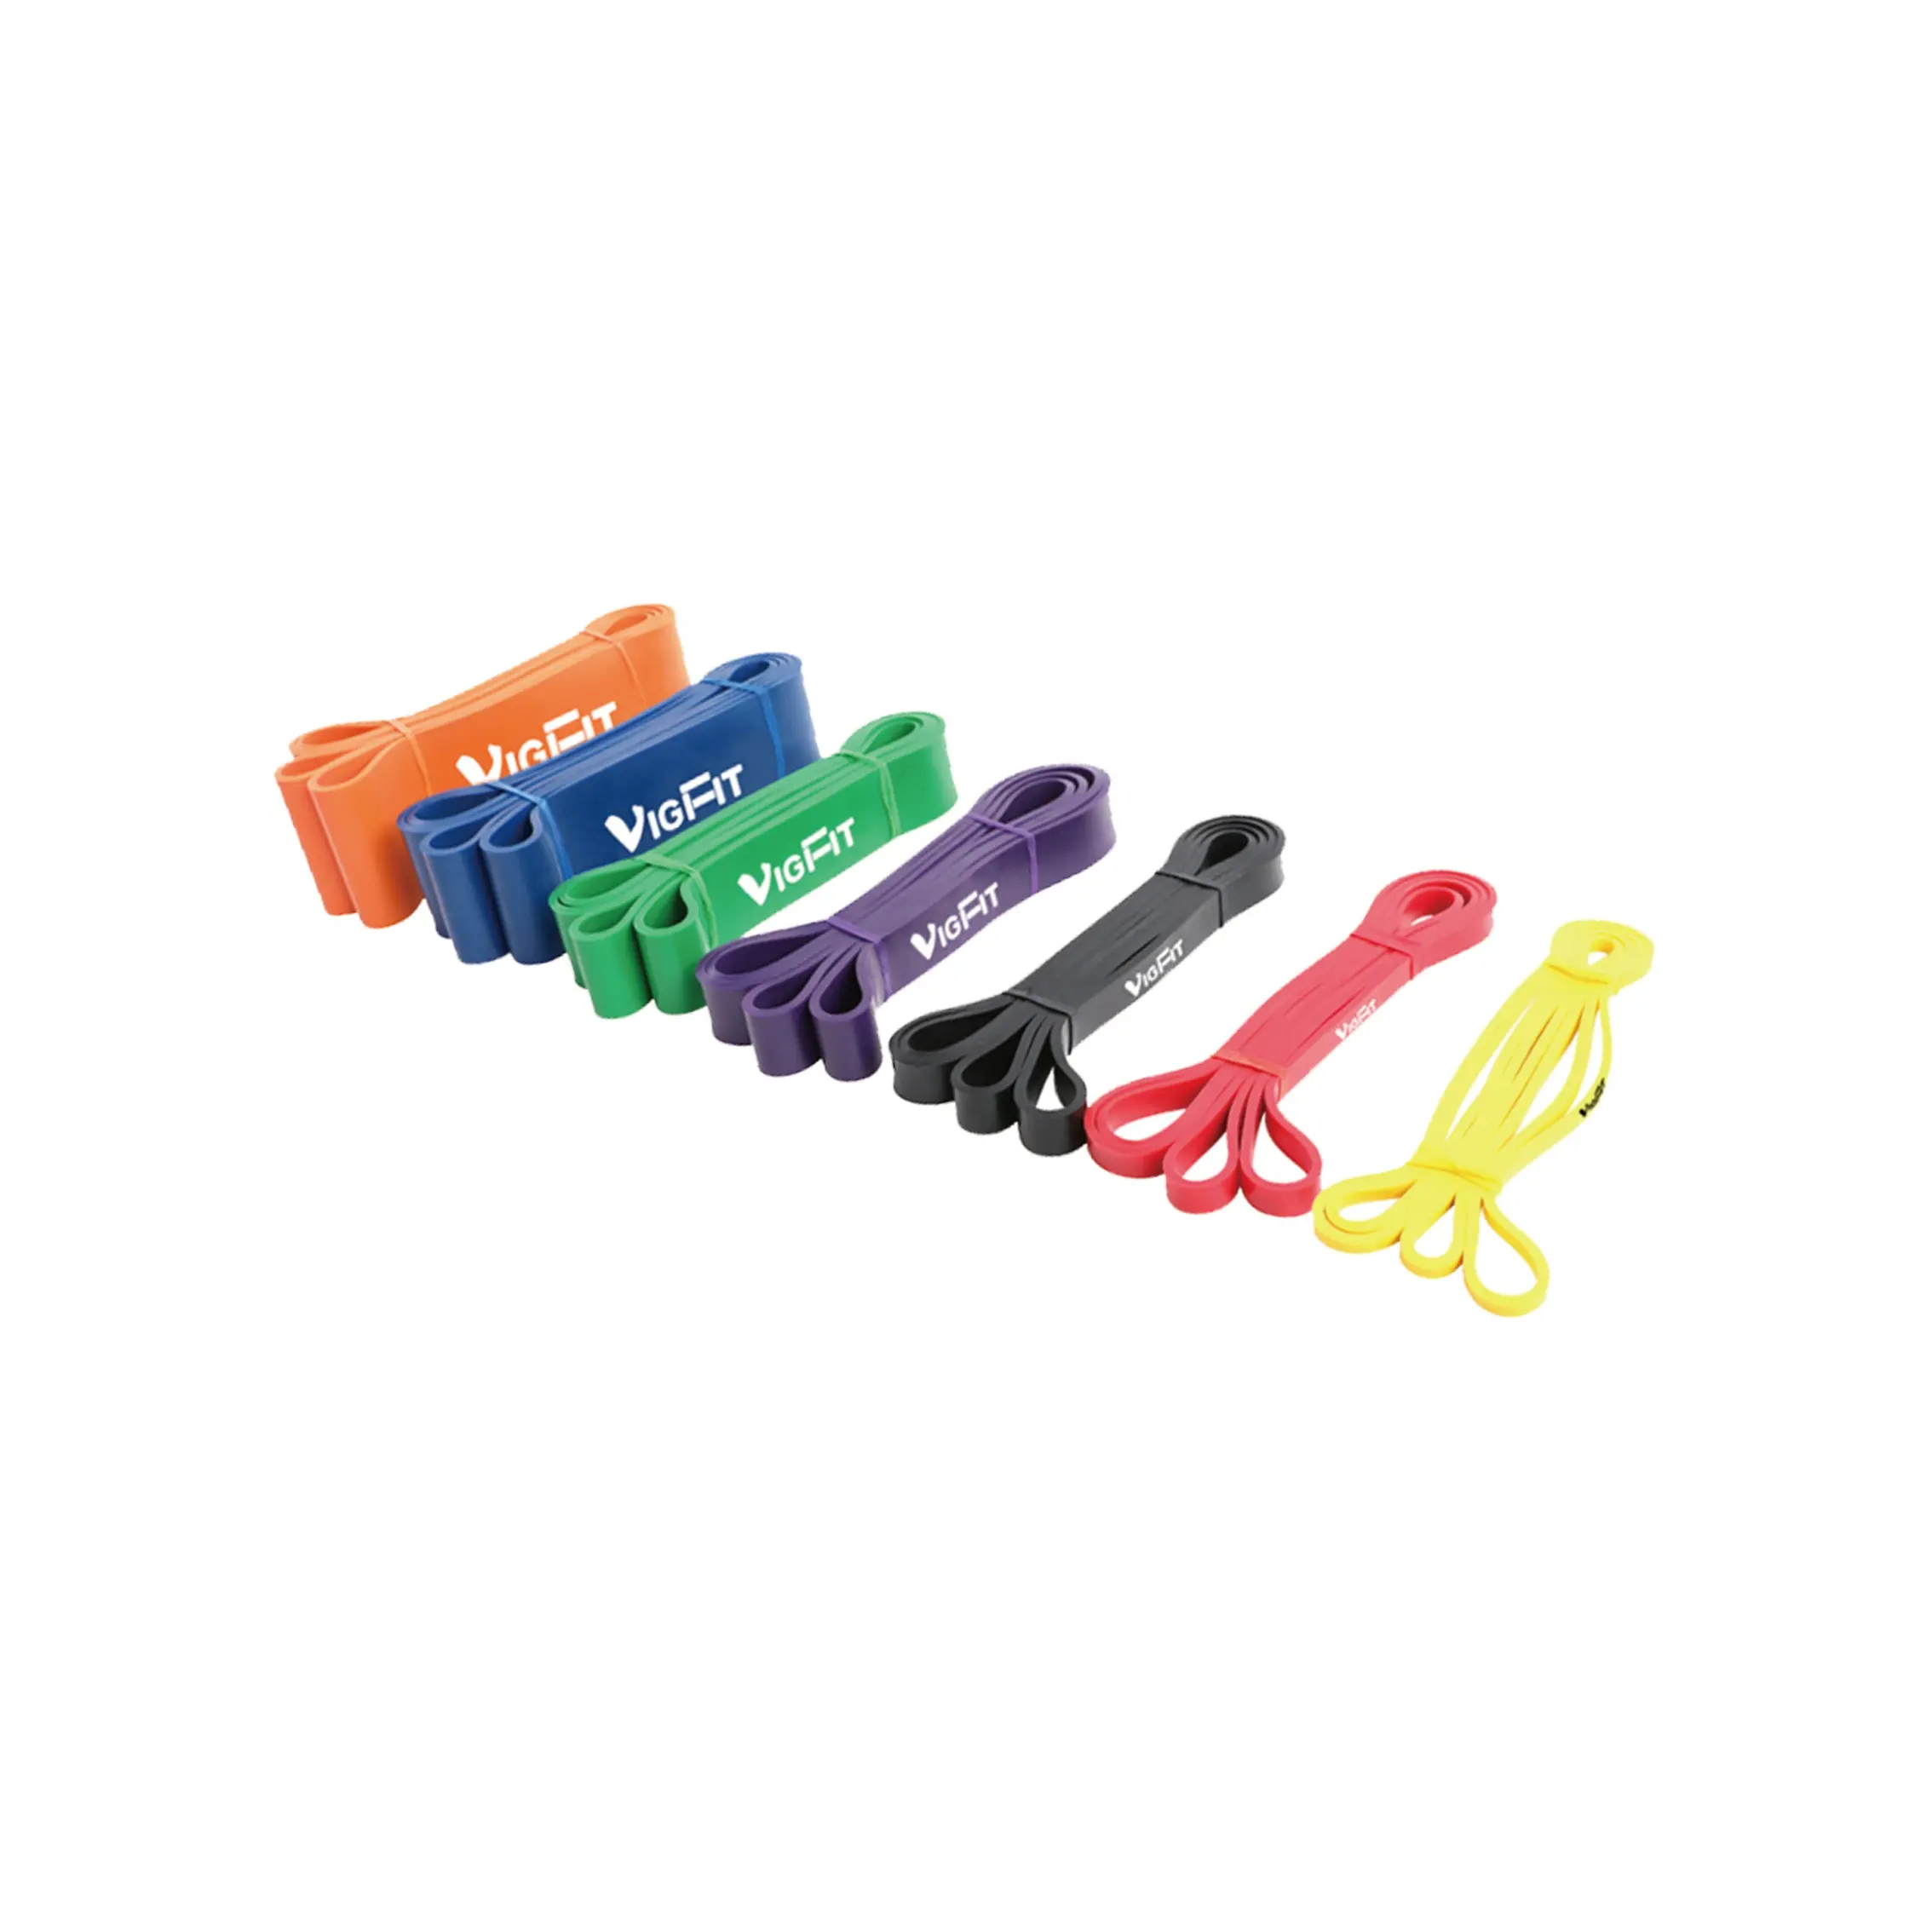 VIGFIT Resistance Band Pull Up Assistance Bands Workout Exercise Elastic Bands for Stretch